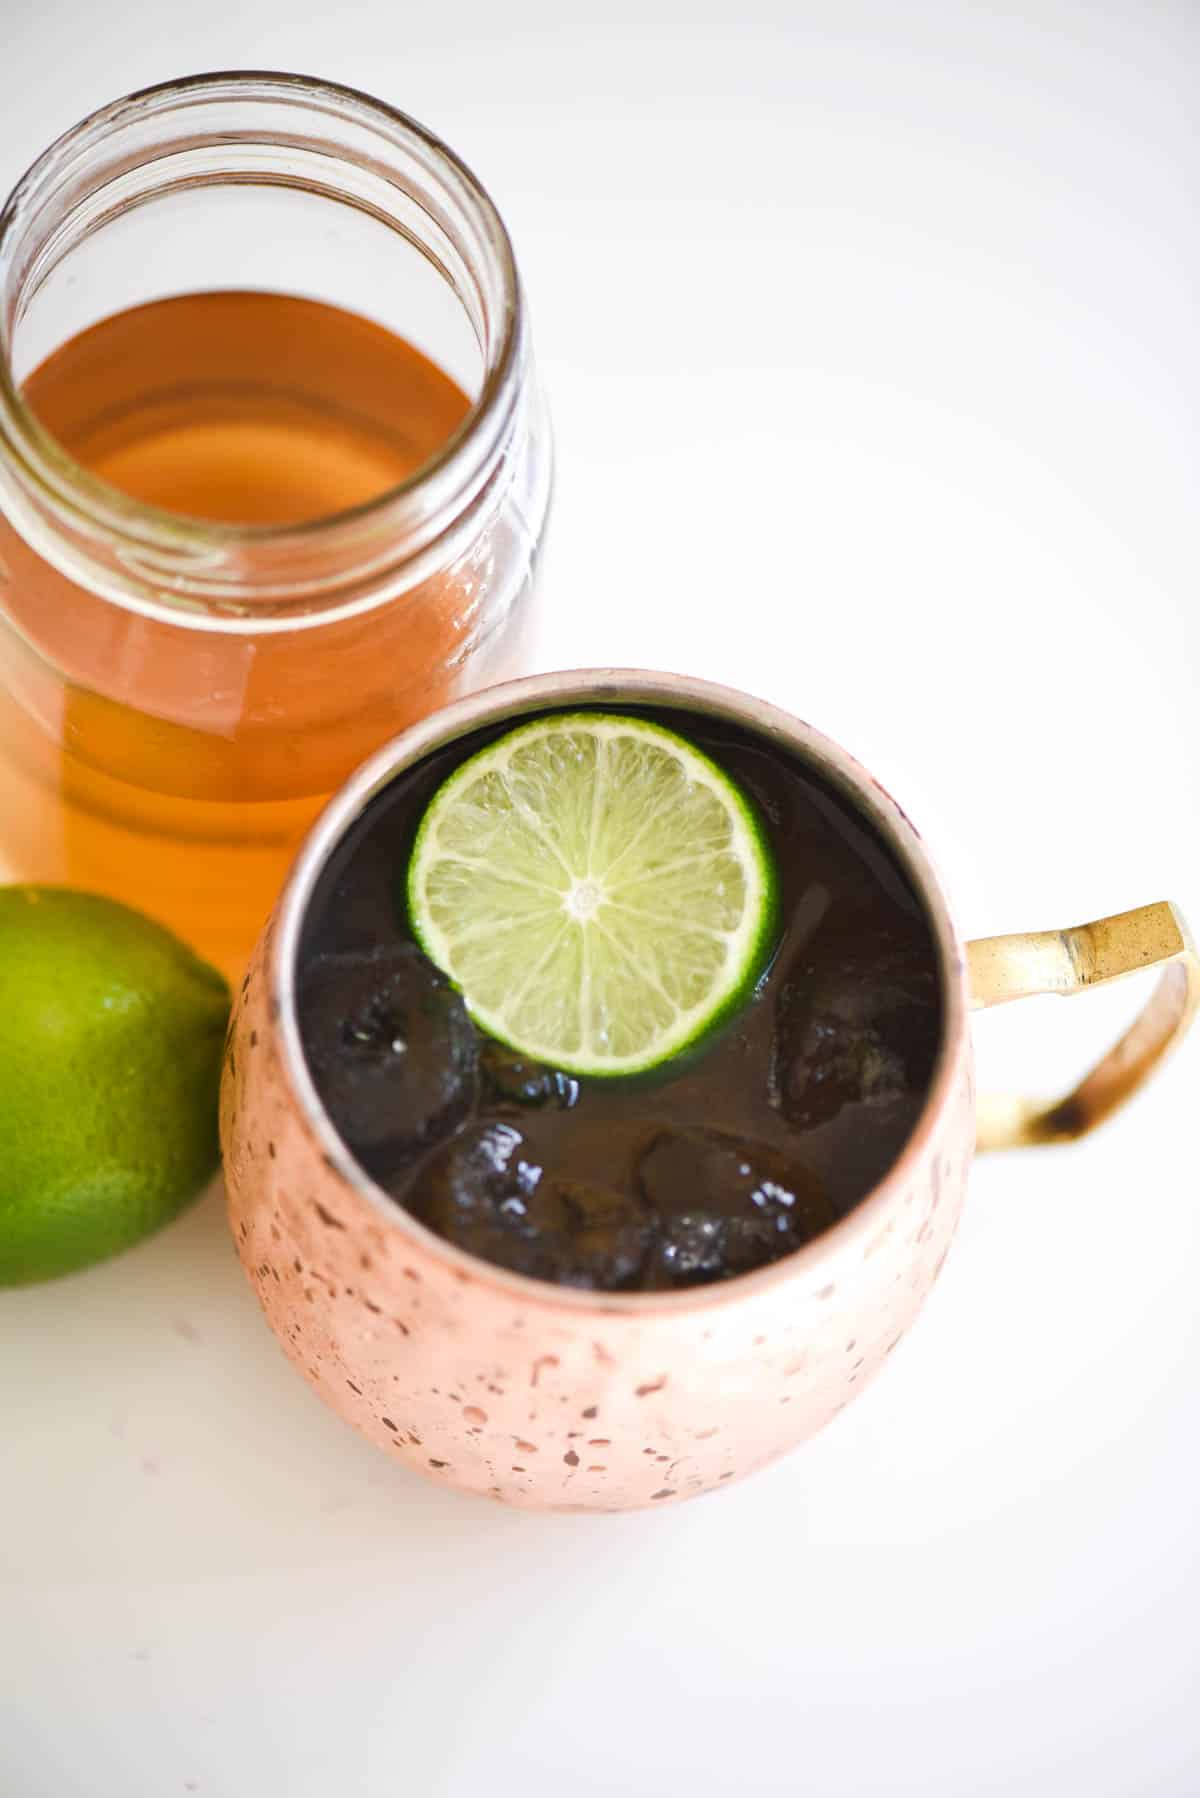 A jar of vanilla simple syrup next to a copper moscow mule mug.